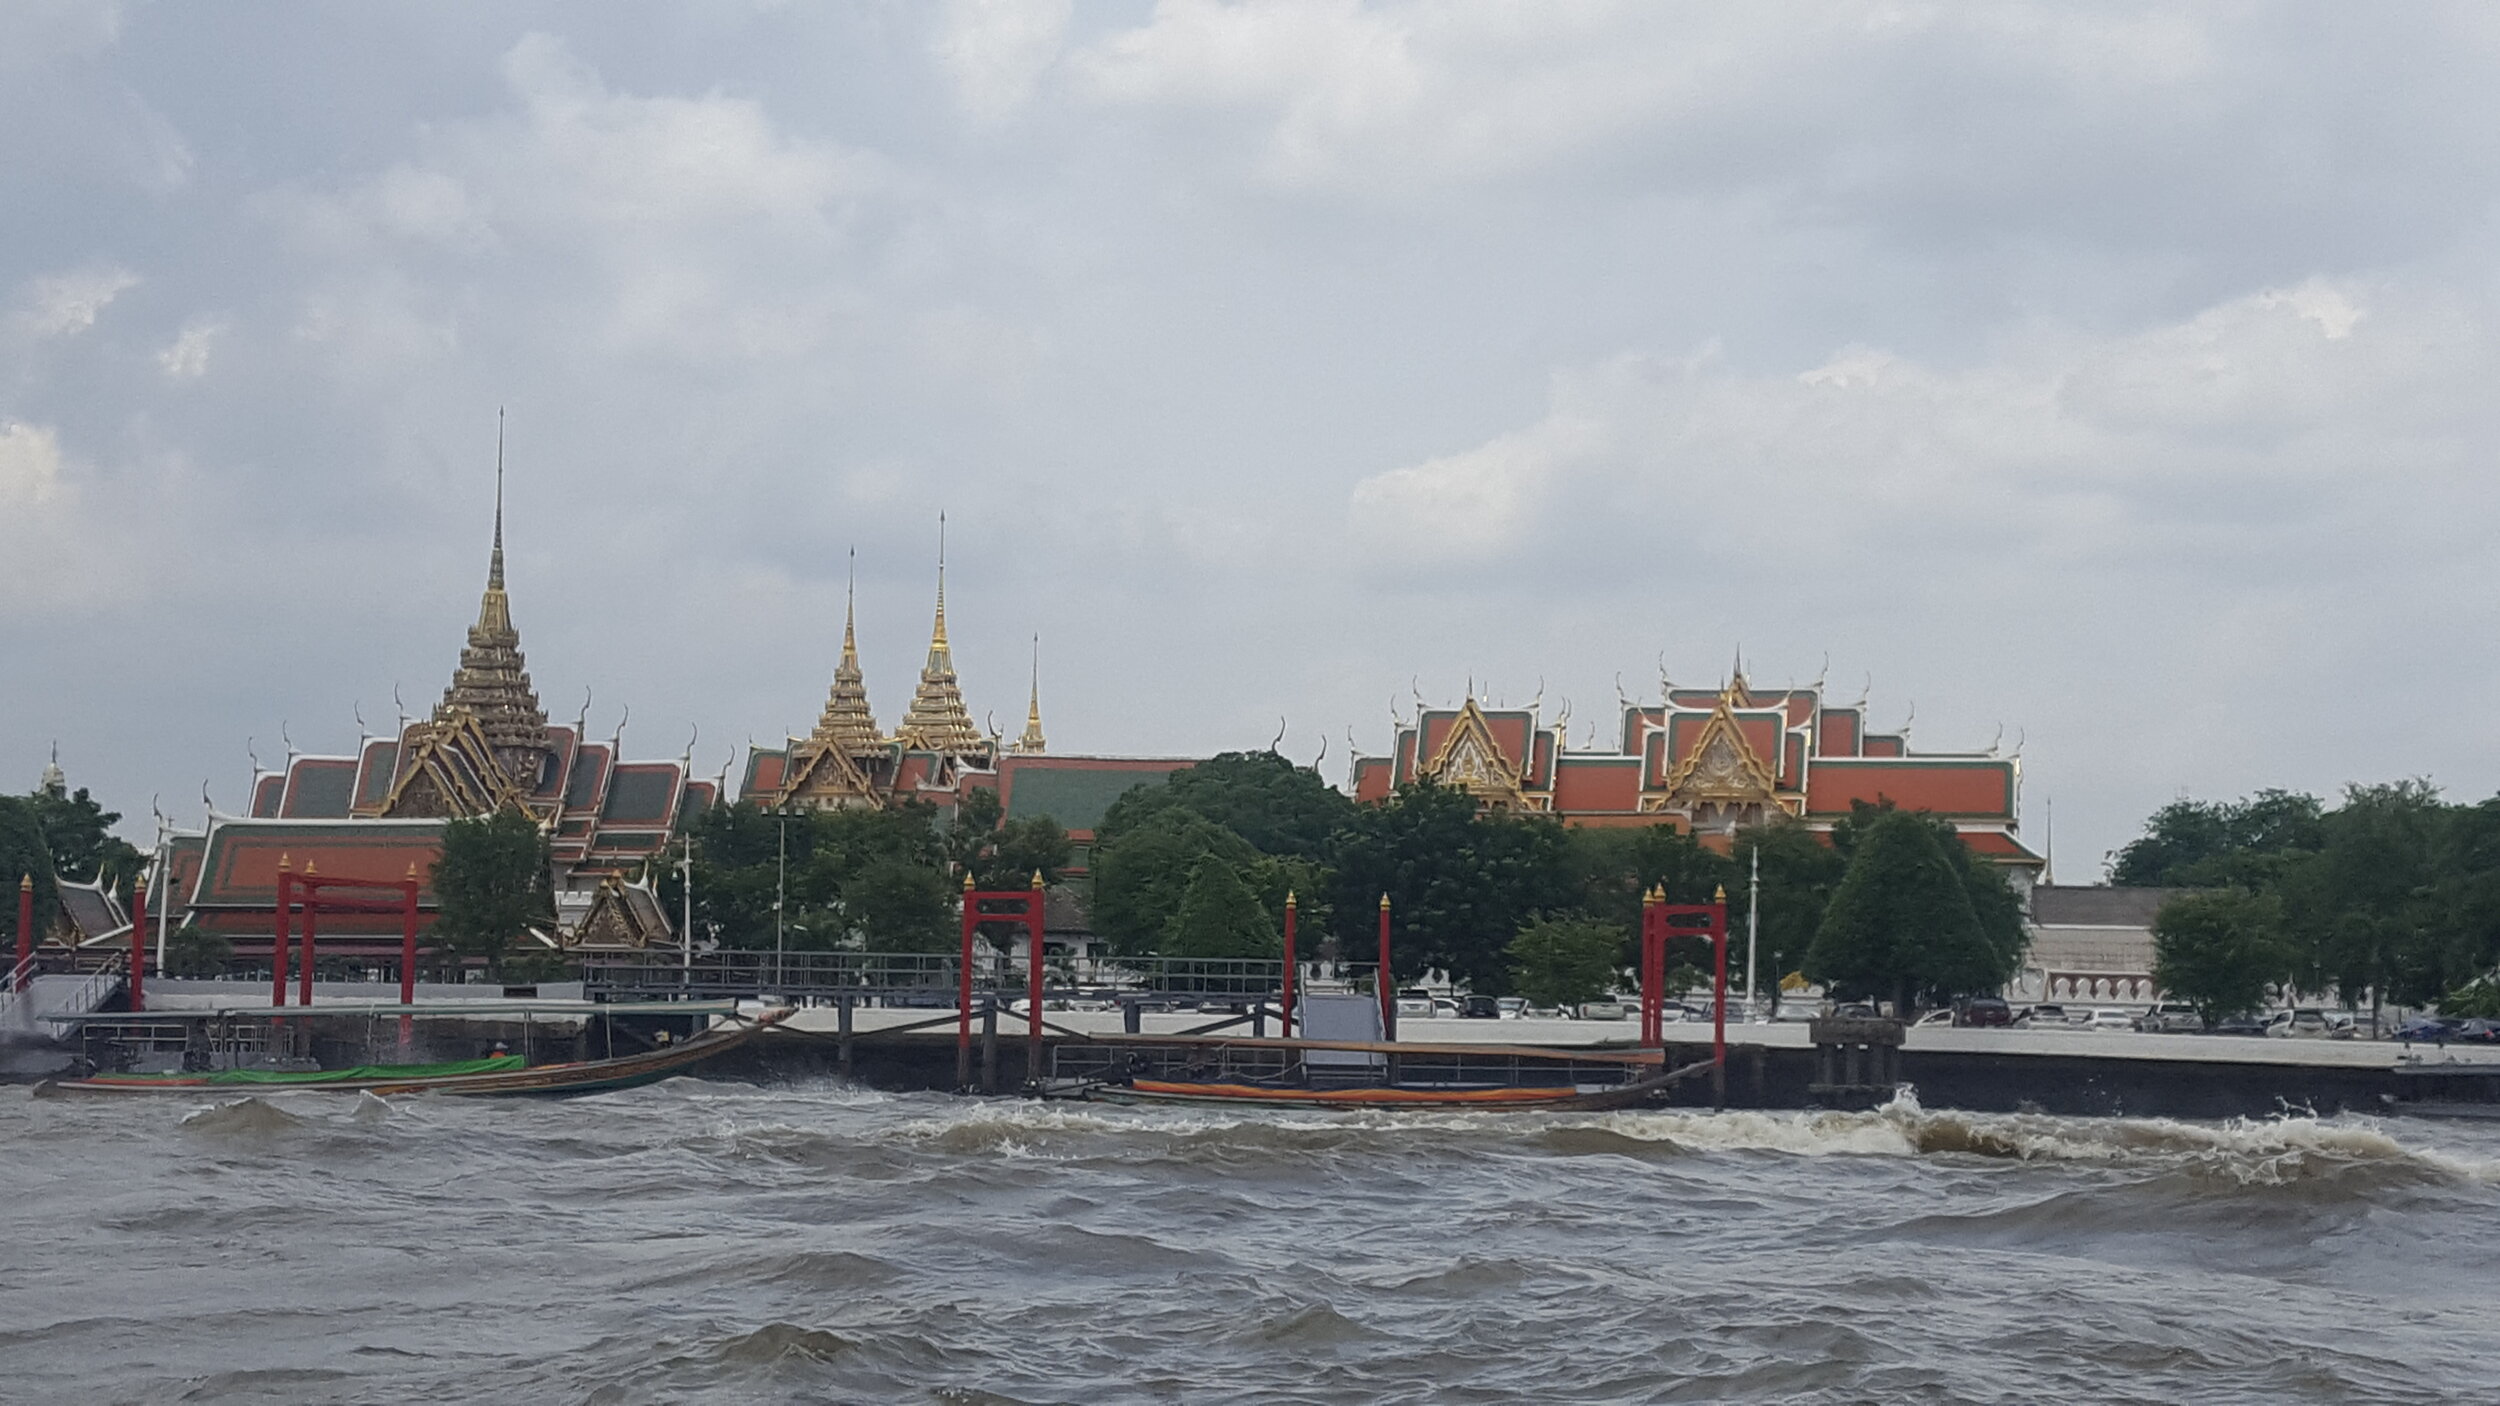 View of the Grand Palace from the Chao Phraya River on a Khlong